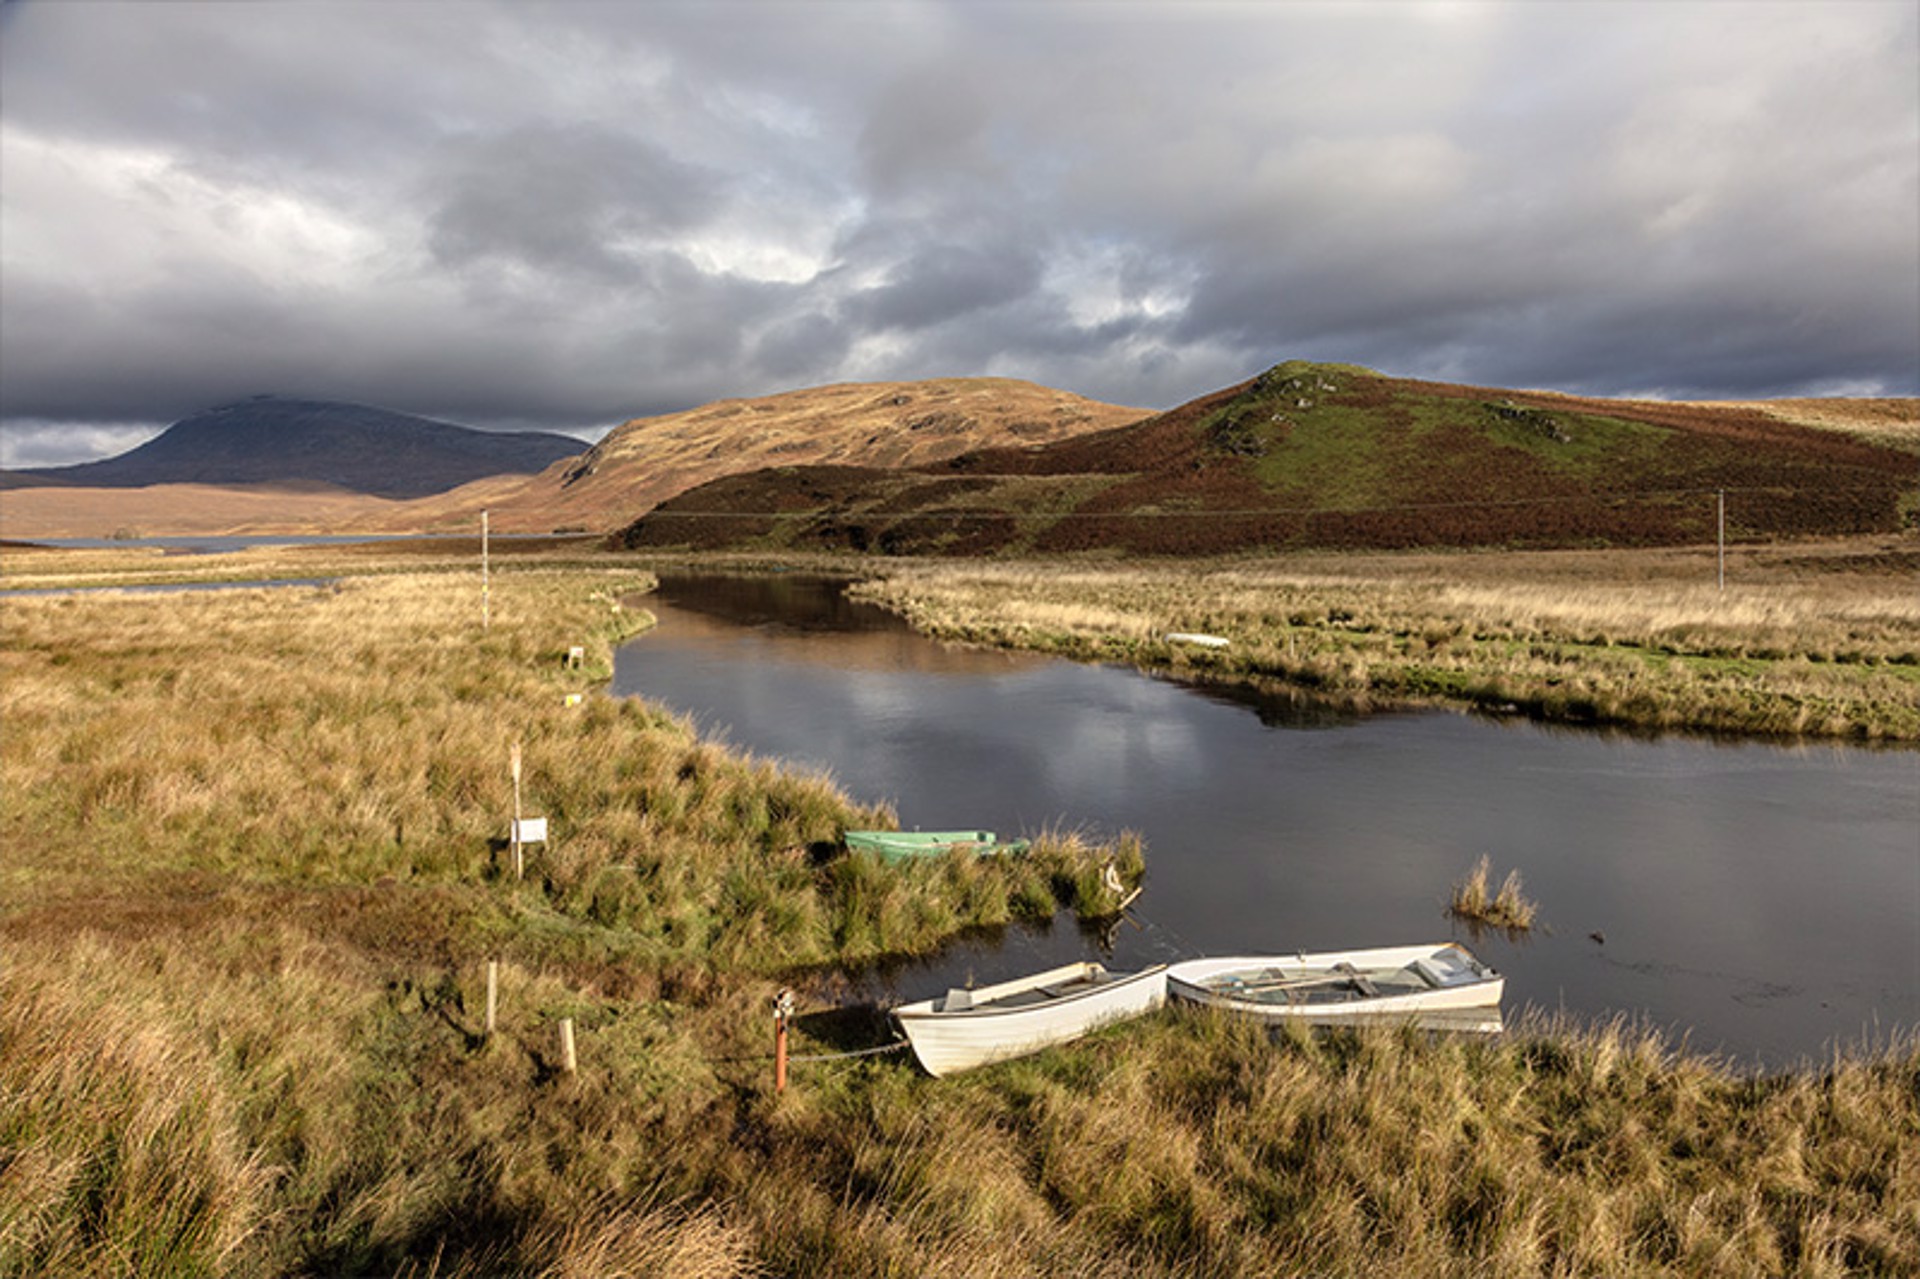 Four Boats, Lairg - Elphin by Jerry Park